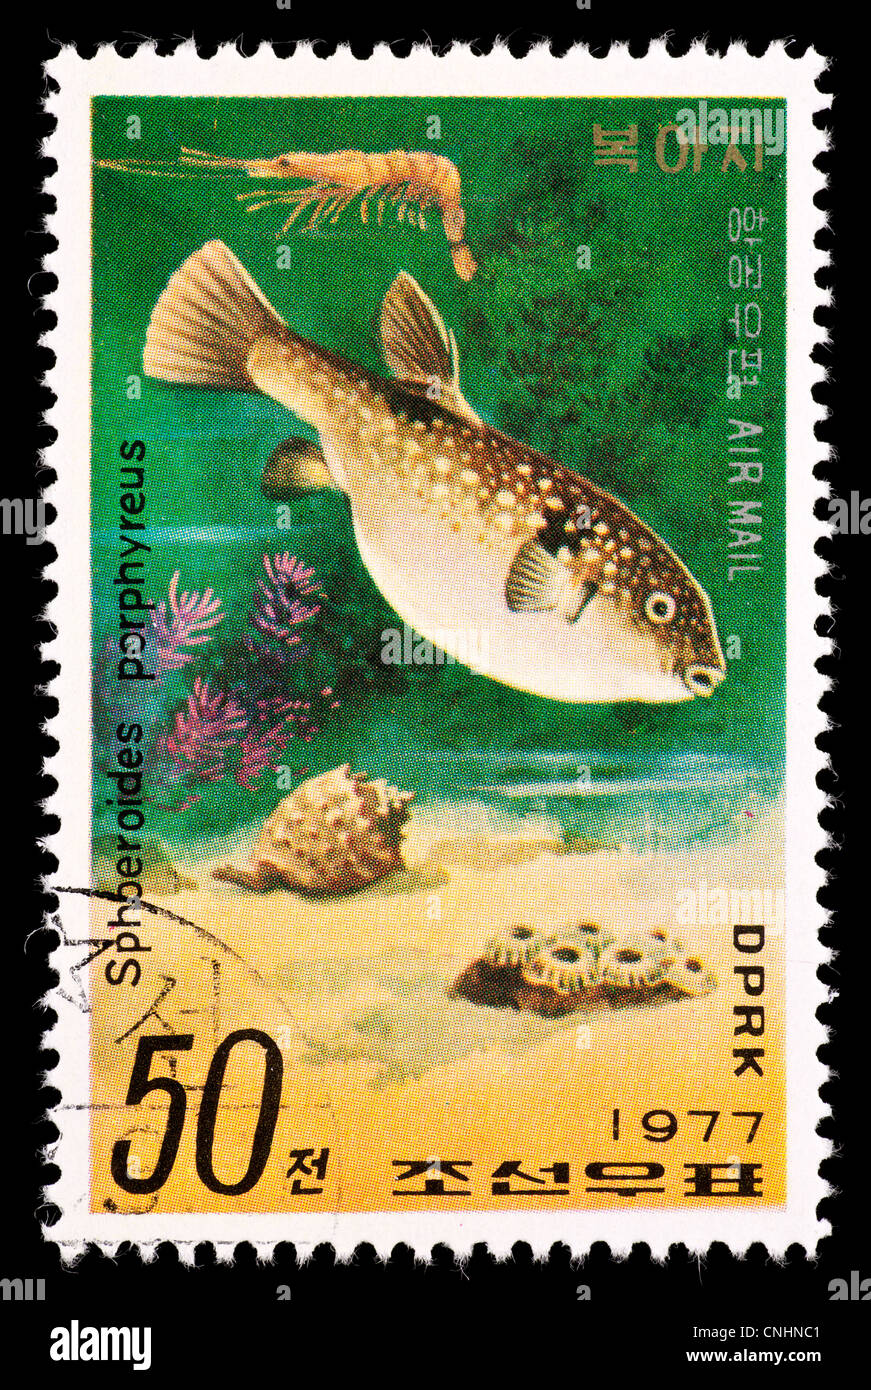 Postage stamp from North Korea depicting a puffer fish (Sphoeroides porphyreus) Stock Photo